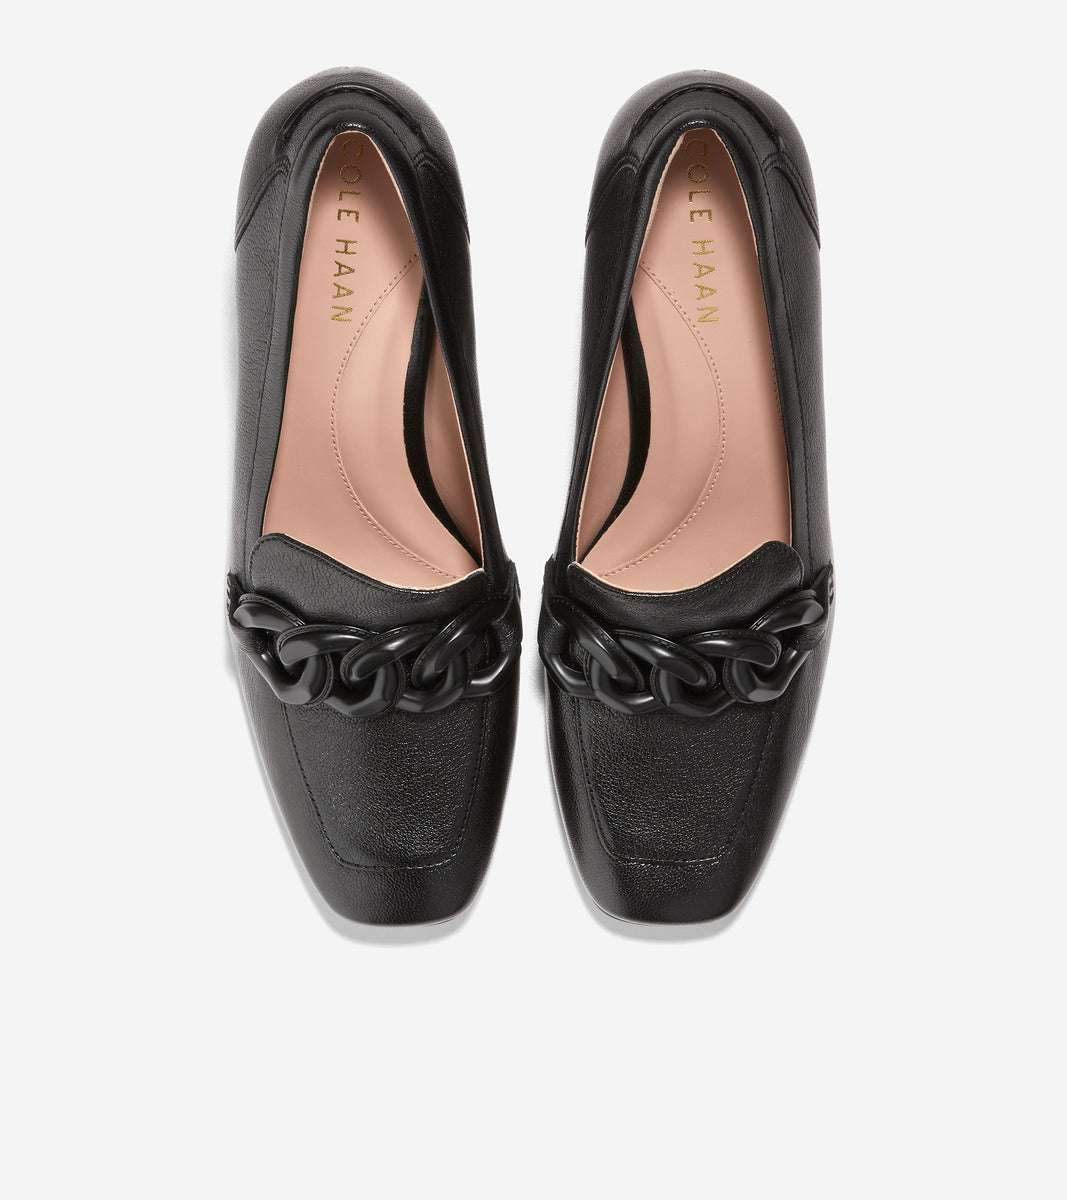 Women's Chrystie Square Chain Loafer